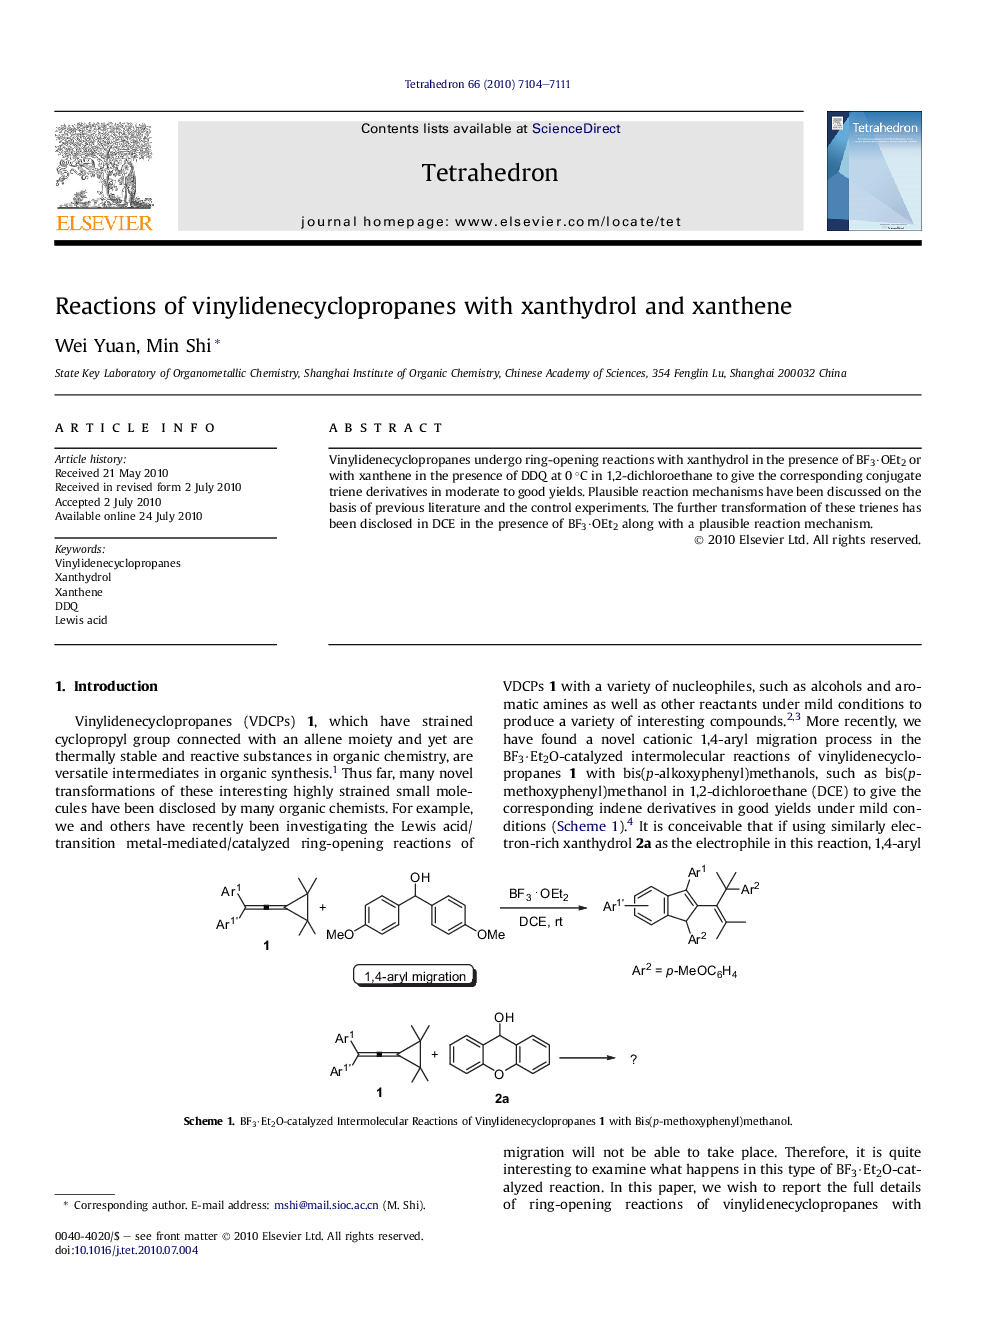 Reactions of vinylidenecyclopropanes with xanthydrol and xanthene